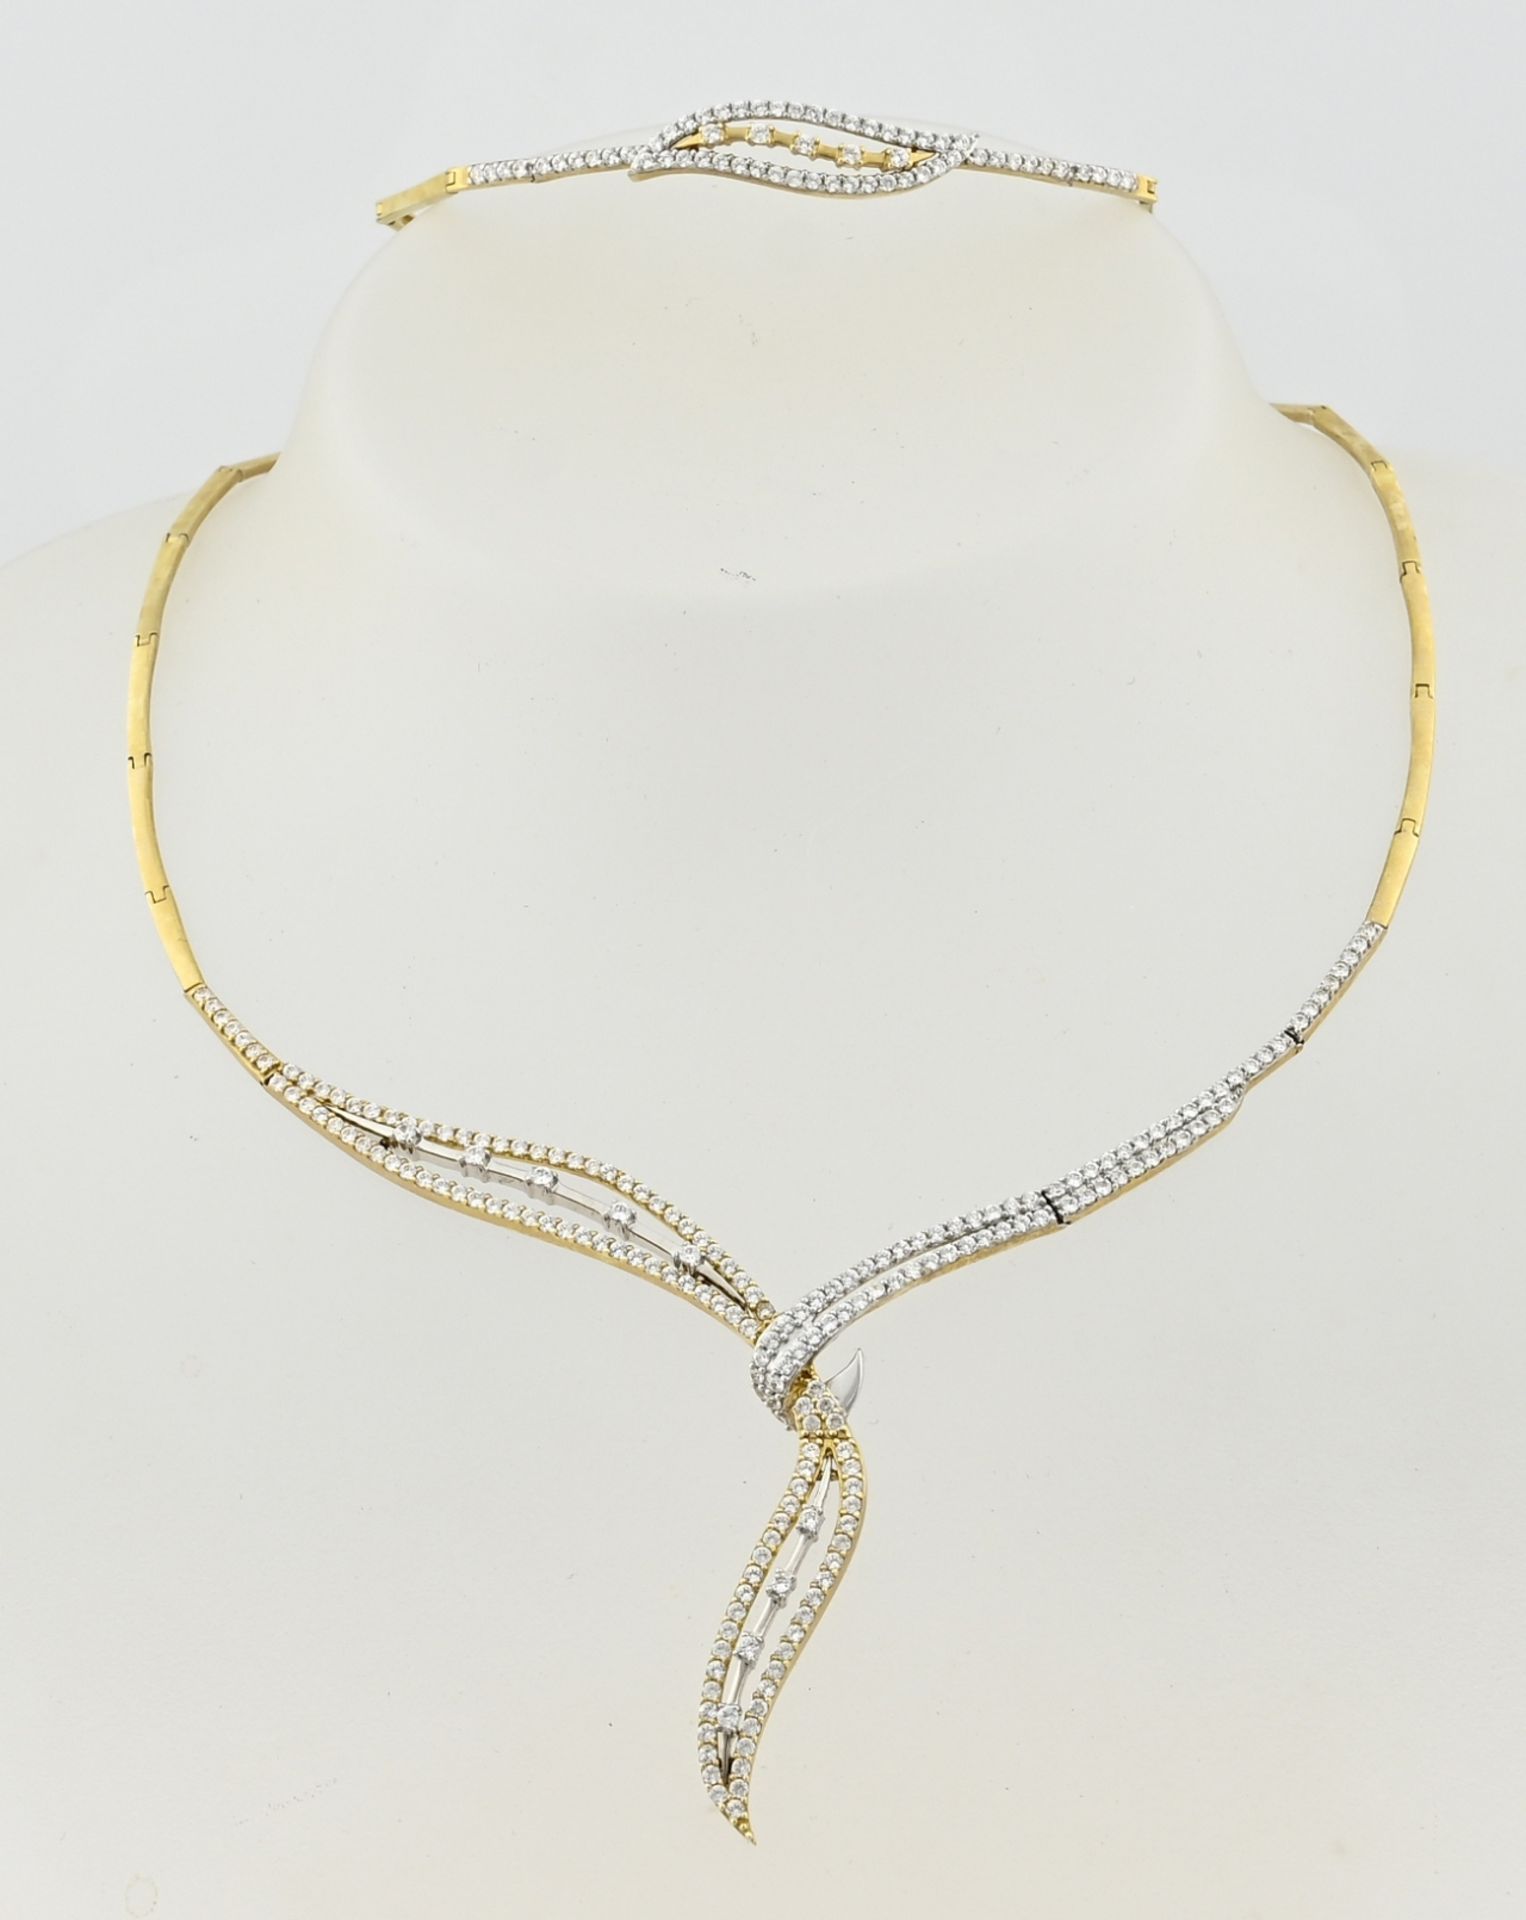 Gold choker and bracelet with zirconias